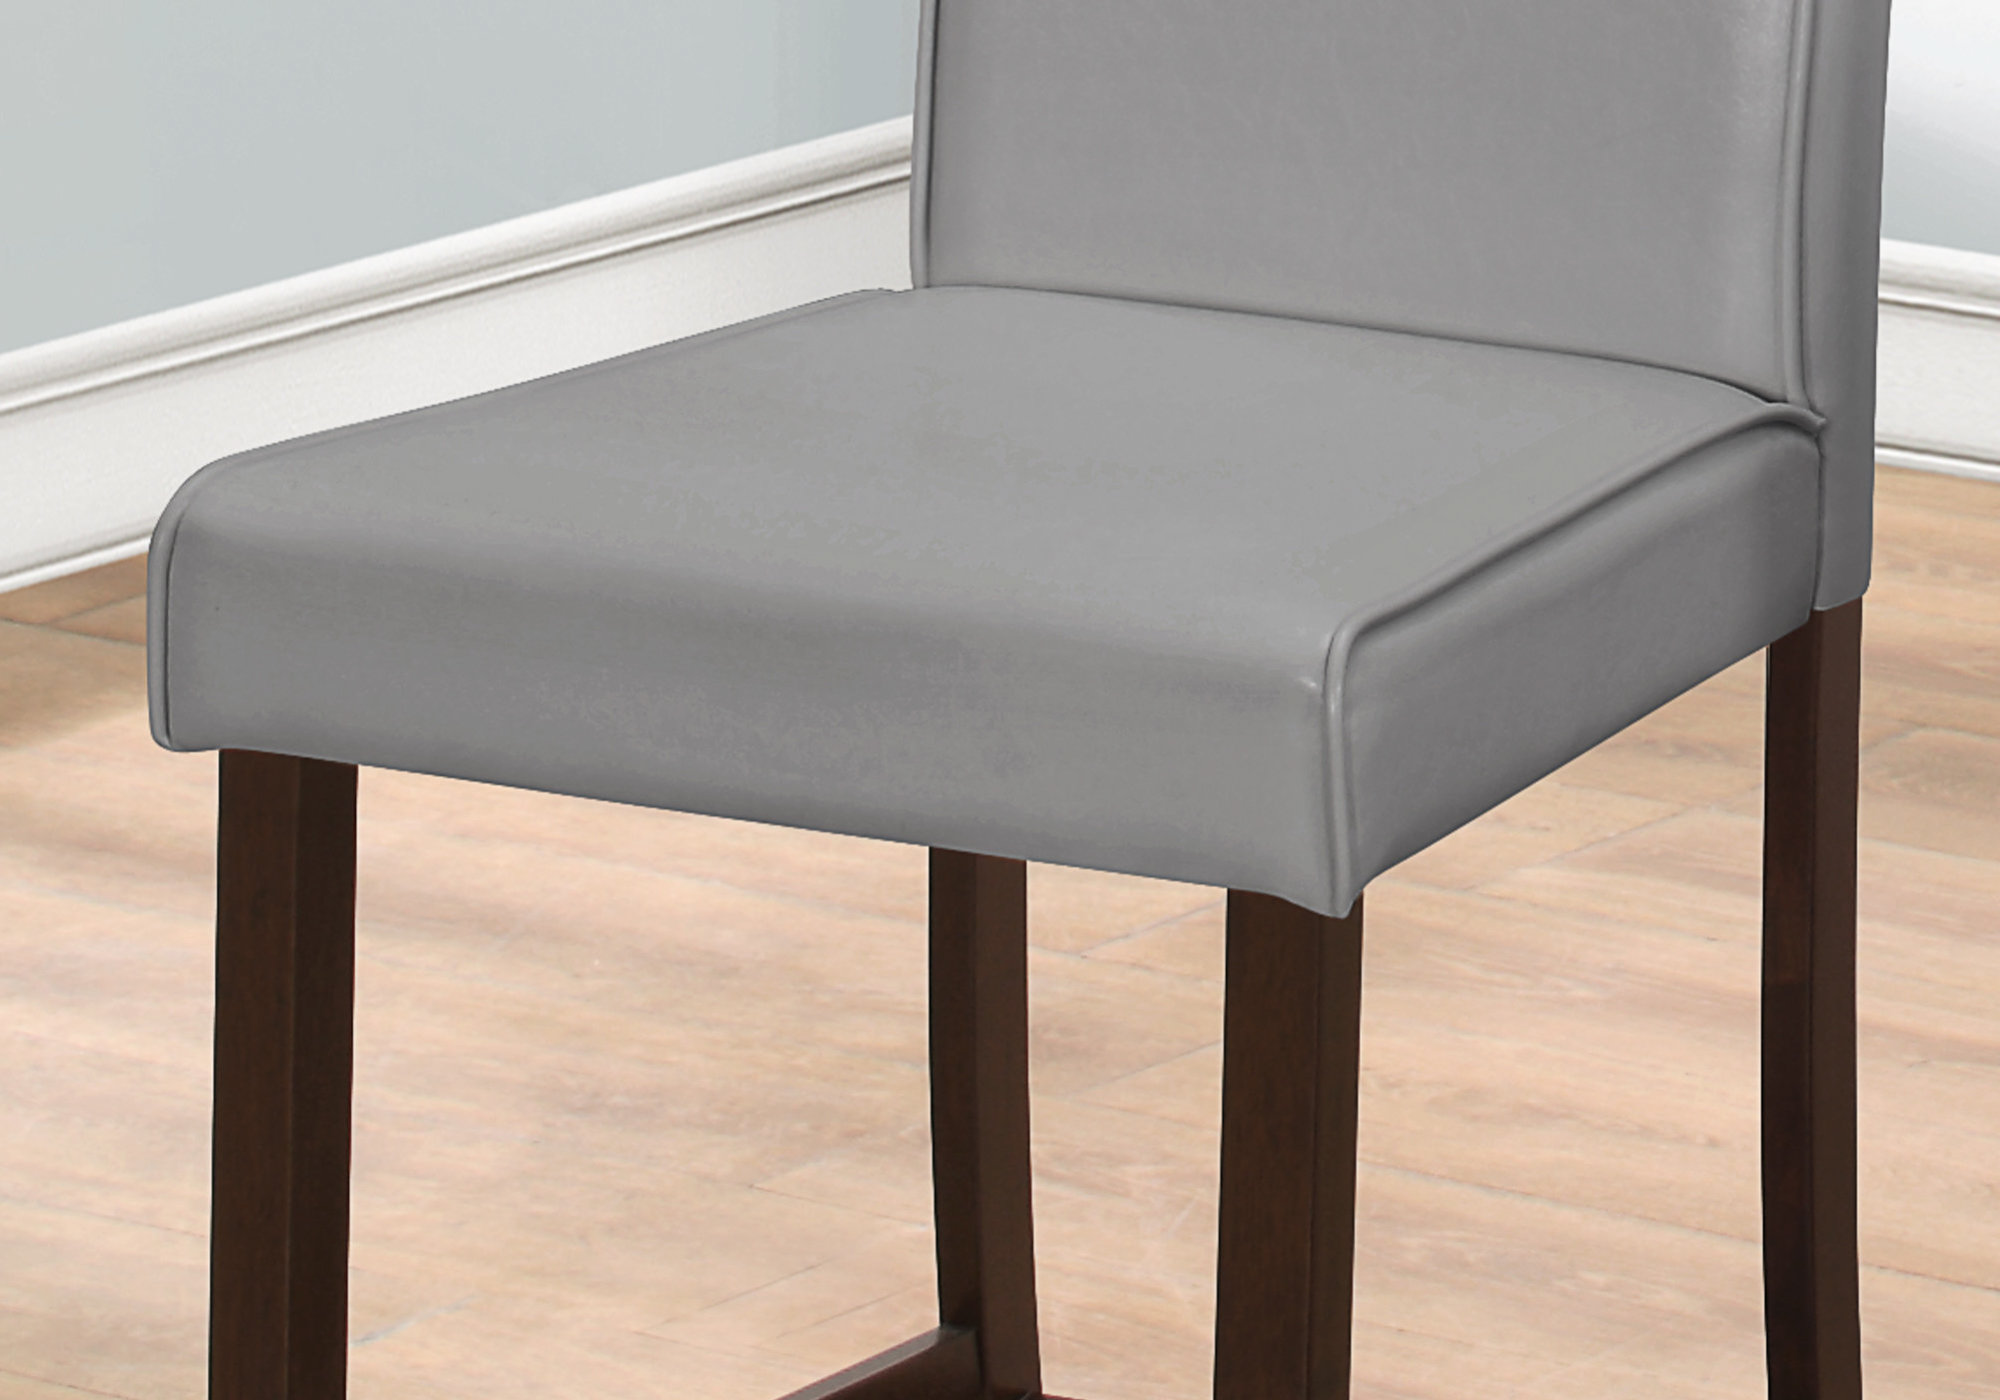 Two 40" Grey Leather Look Solid Wood and MDF Counter Height Dining Chairs